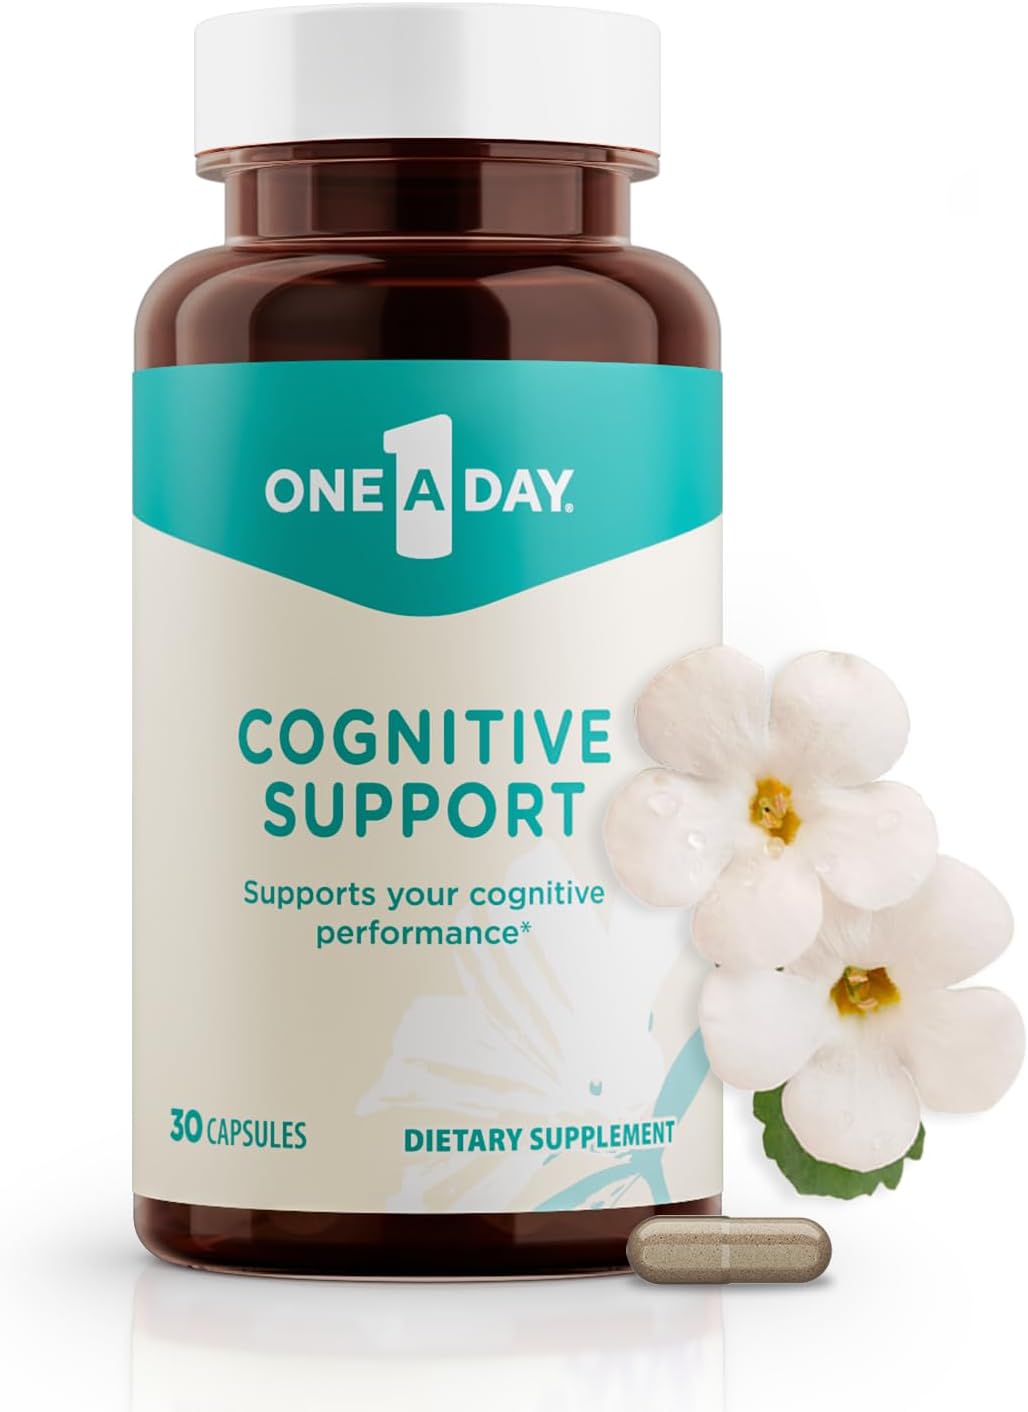 One-A-Day Cognitive Supplement – Brain Supplement to Support Cognitive Performance for Men and Women with Bacopa, Rhodiola, & Holy Basil, 30 Capsules - $8.99